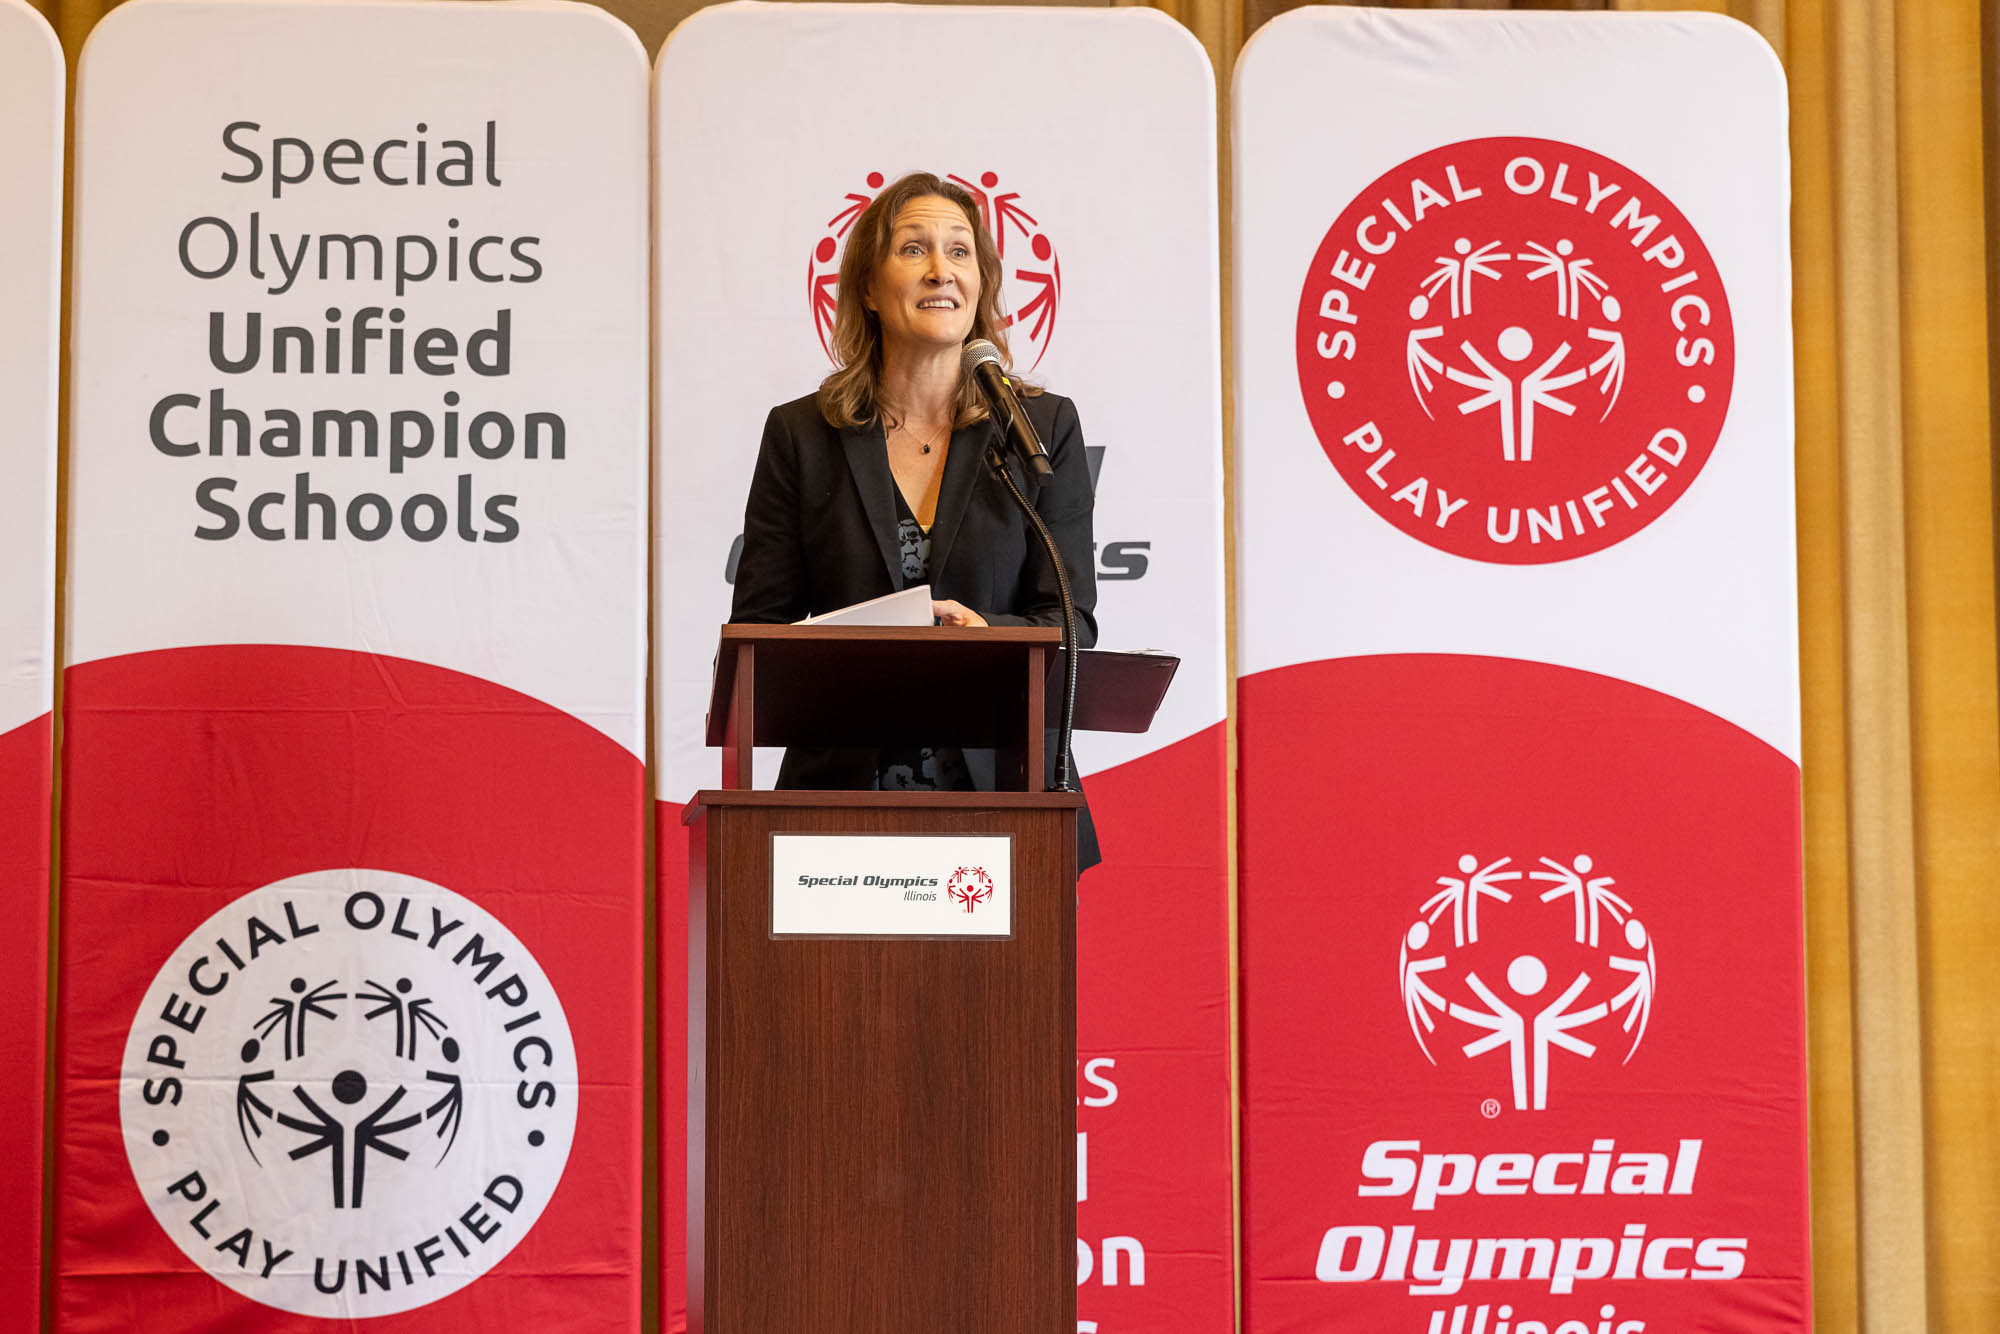 A photo of Rebecca Clark, Anixter's CEO, on a podium in front of a sign that says Special Olympics Unified Champion Schools."